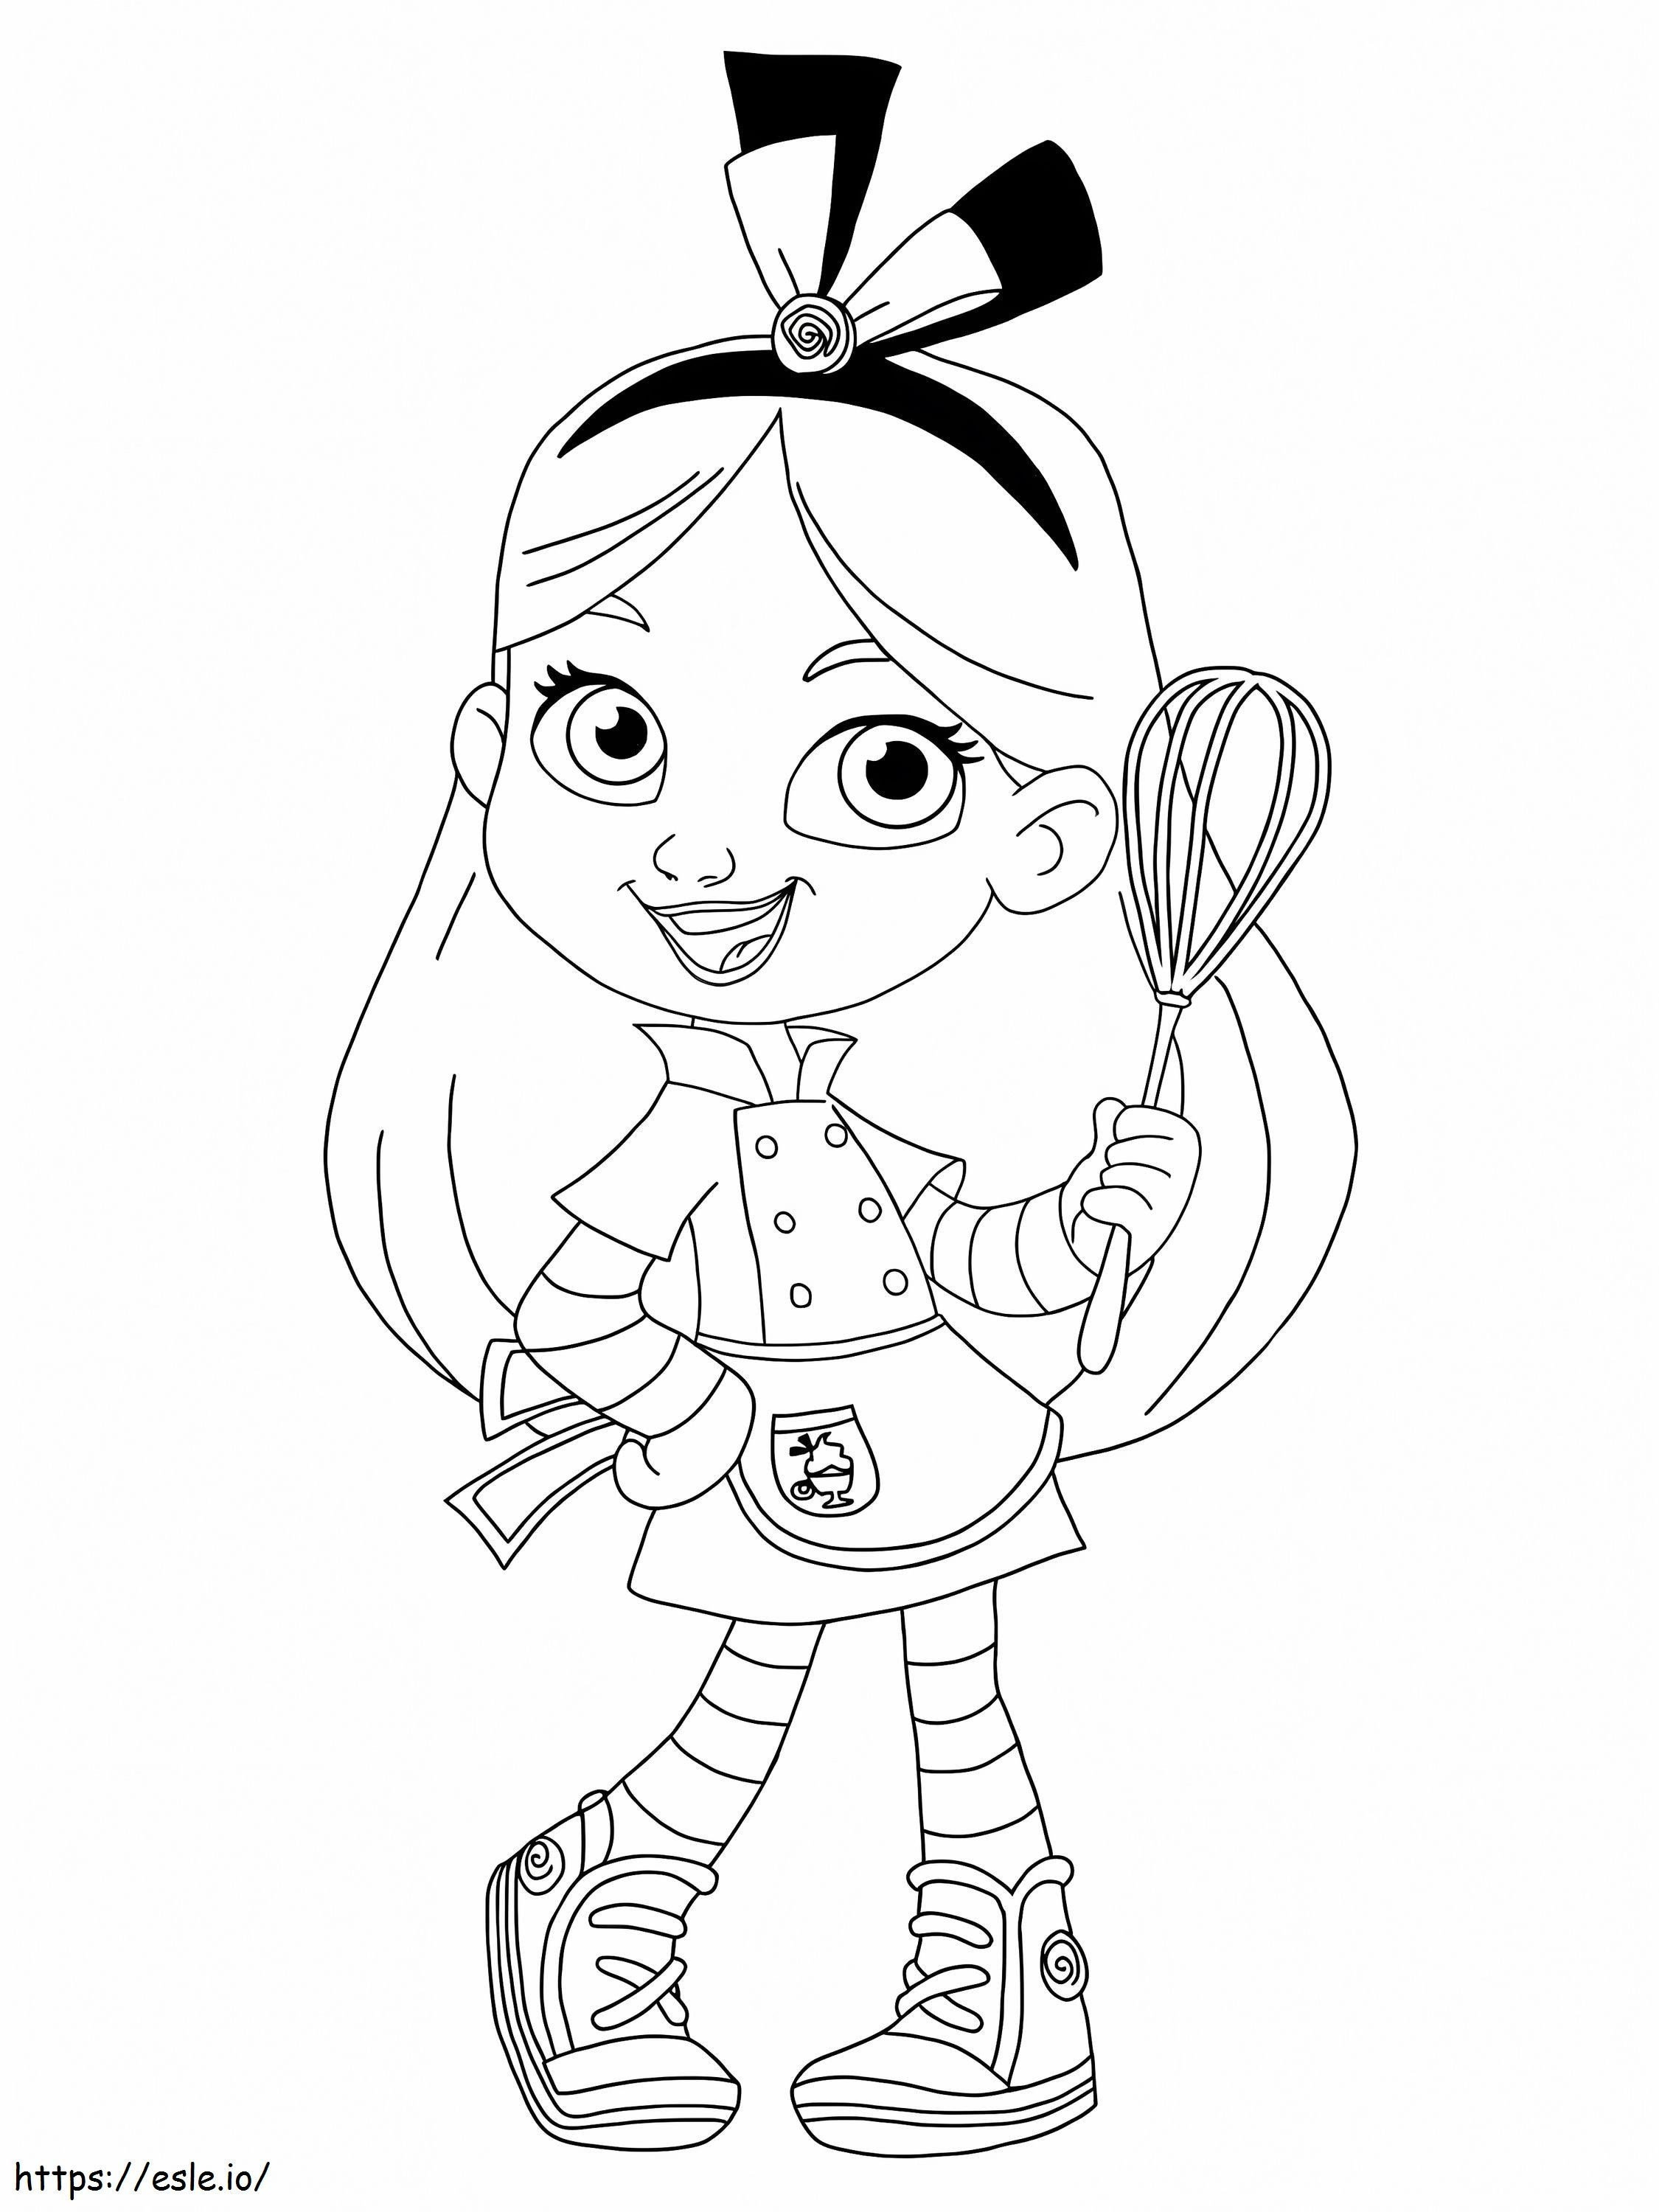 Cute Alices Wonderland Bakery coloring page